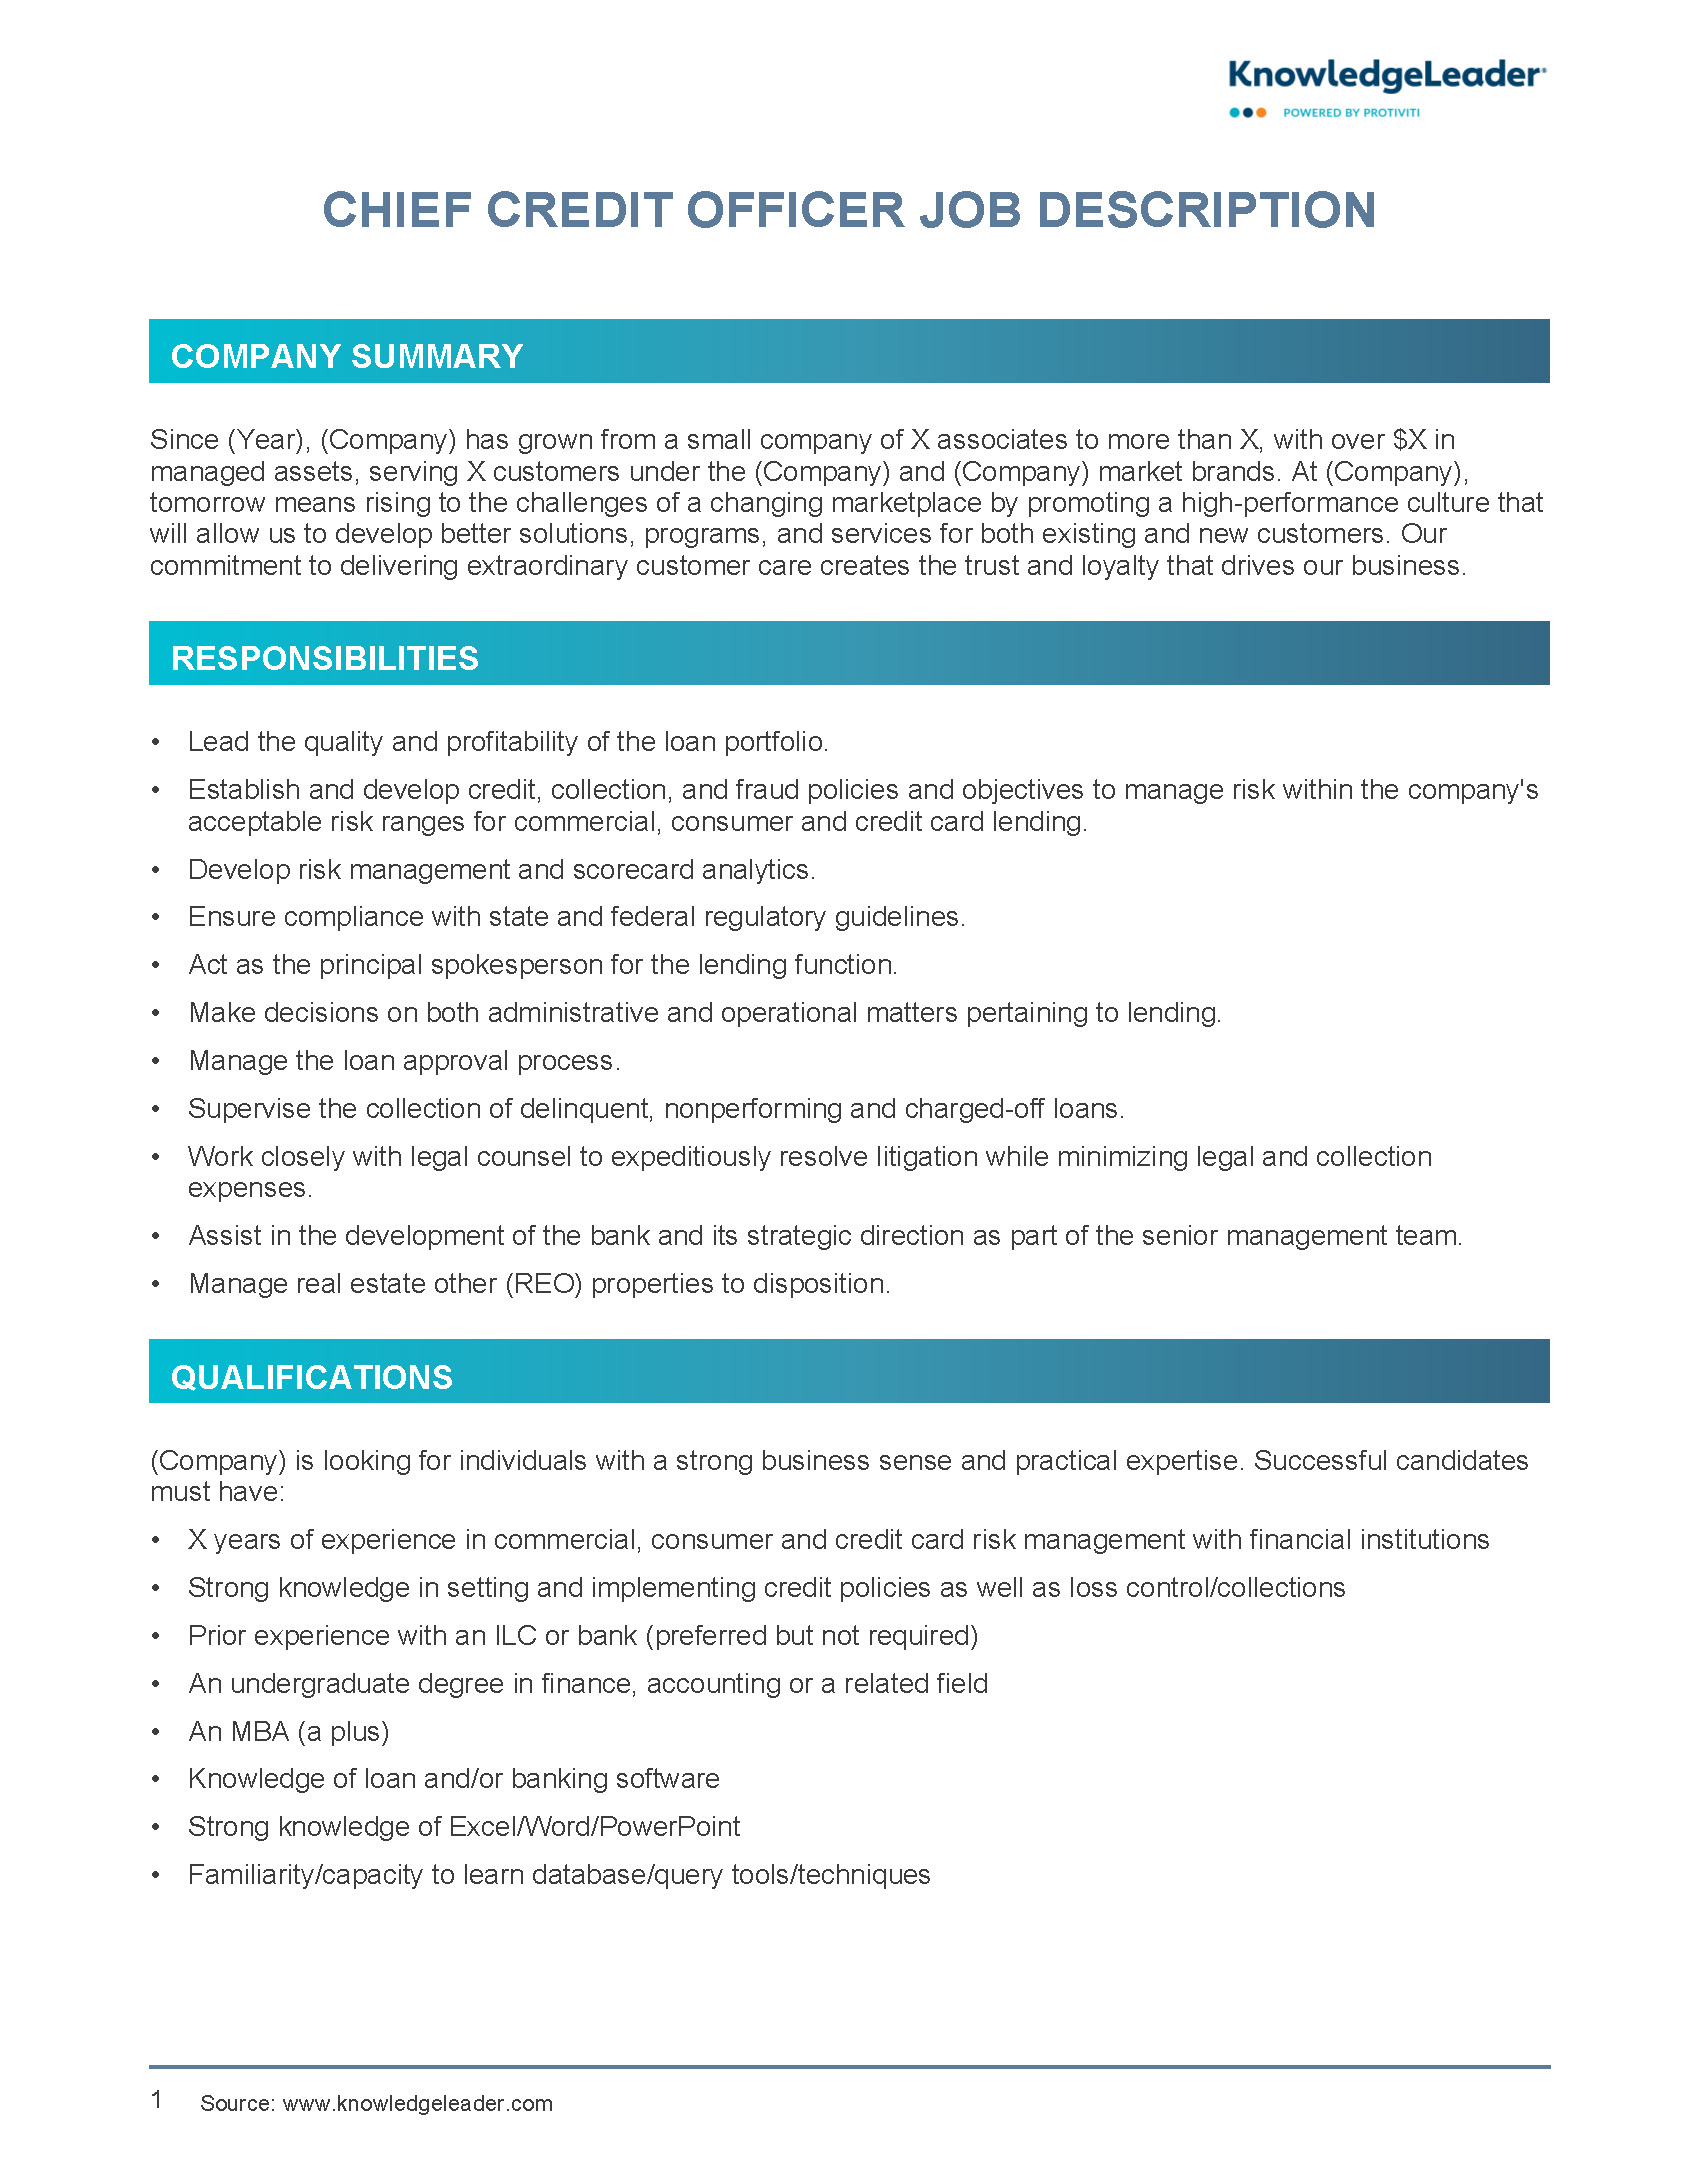 Screenshot of the first page of Chief Credit Officer Job Description